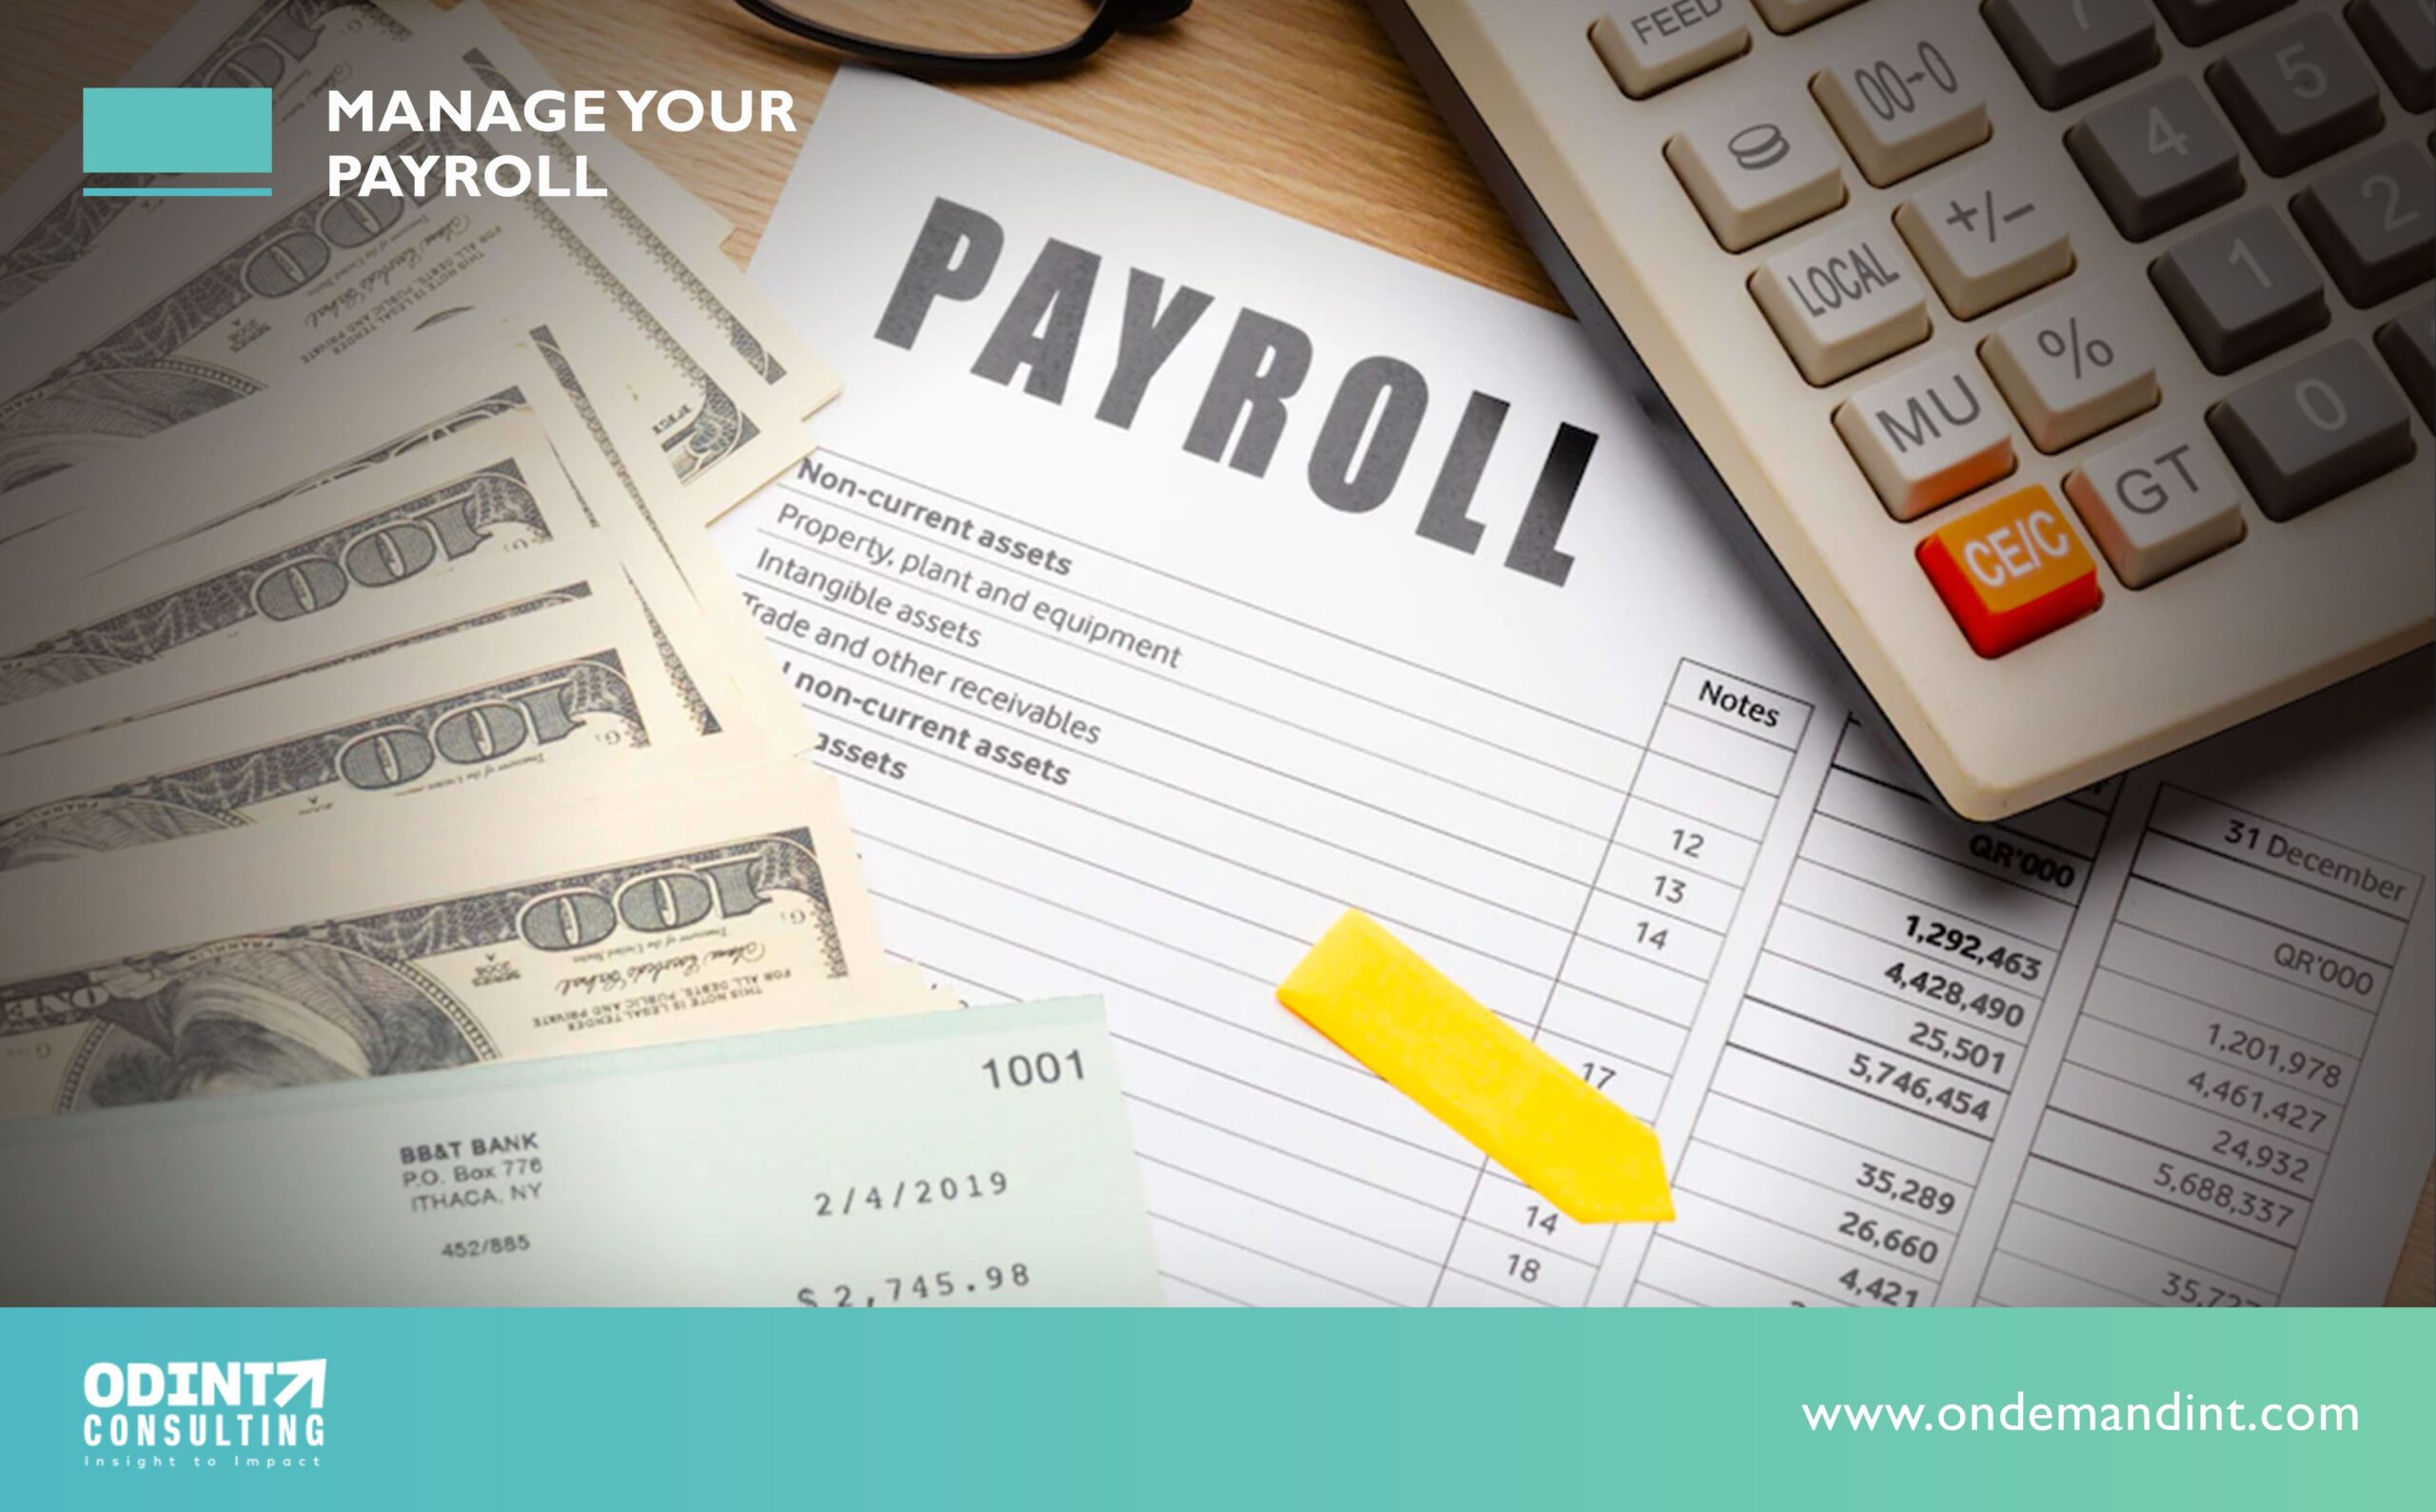 Manage your Payroll: Benefits, Functions & Outsourcing Payroll